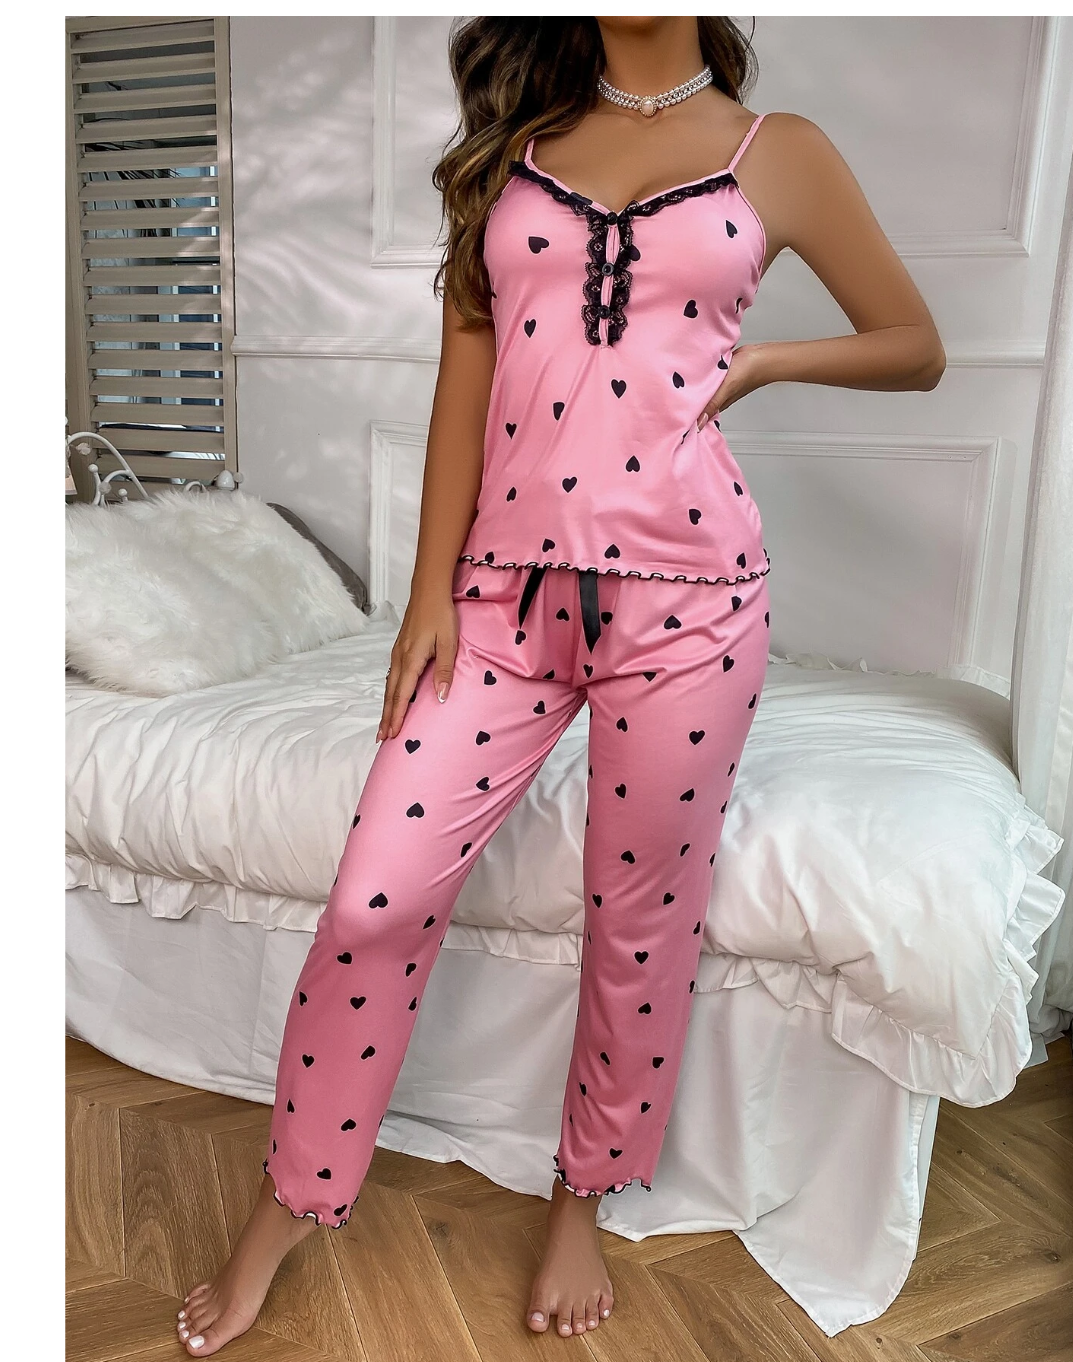 Sweet Dreams: Heart Print Delight with Contrast Lace and Bow Front Cami PJ Set.